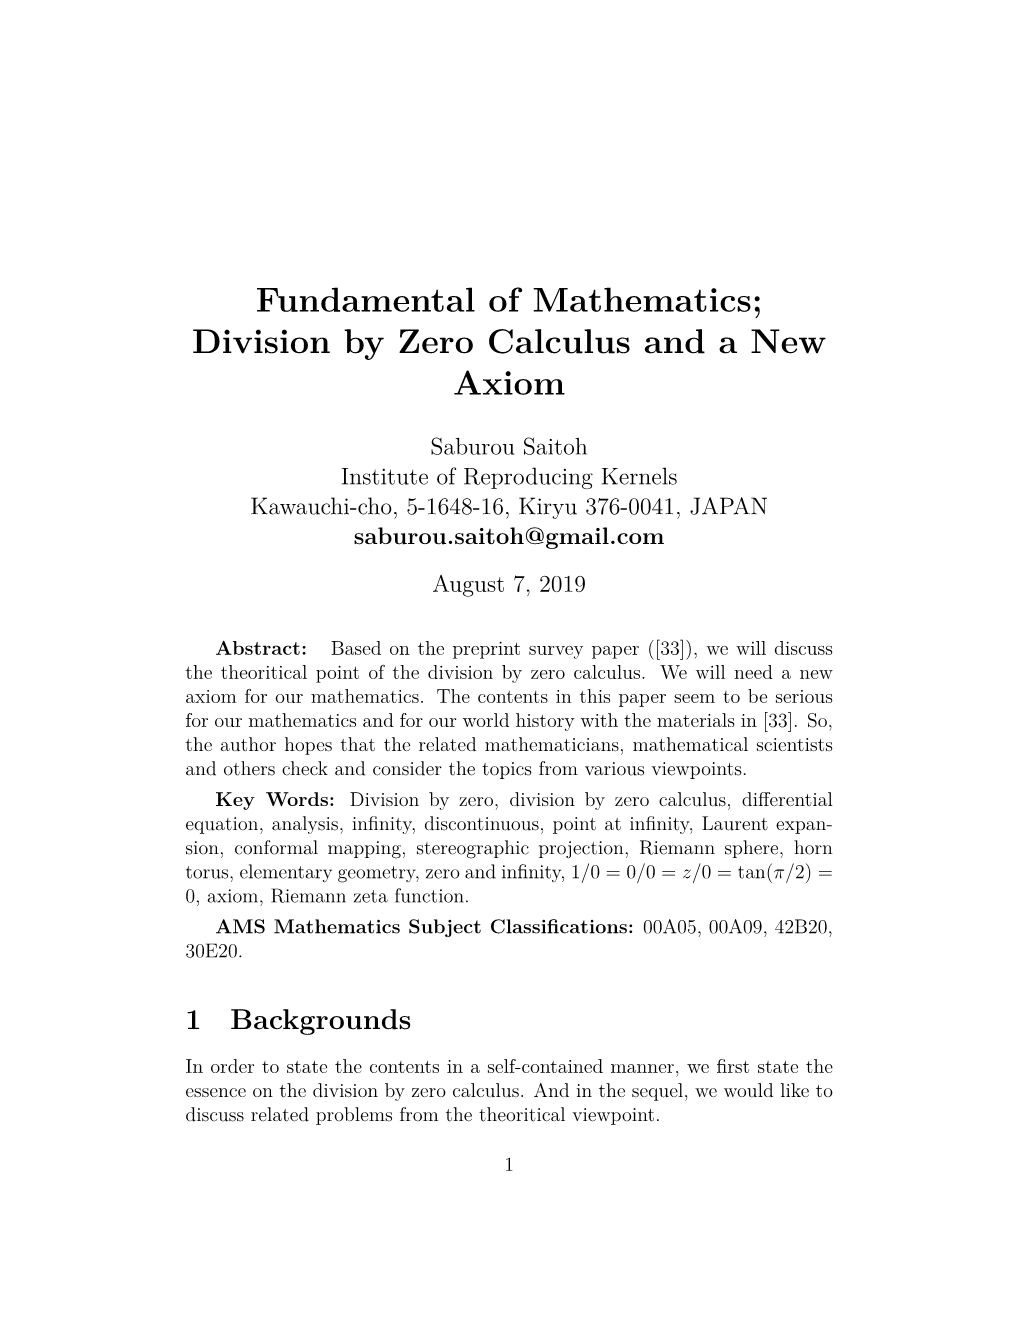 Fundamental of Mathematics; Division by Zero Calculus and a New Axiom